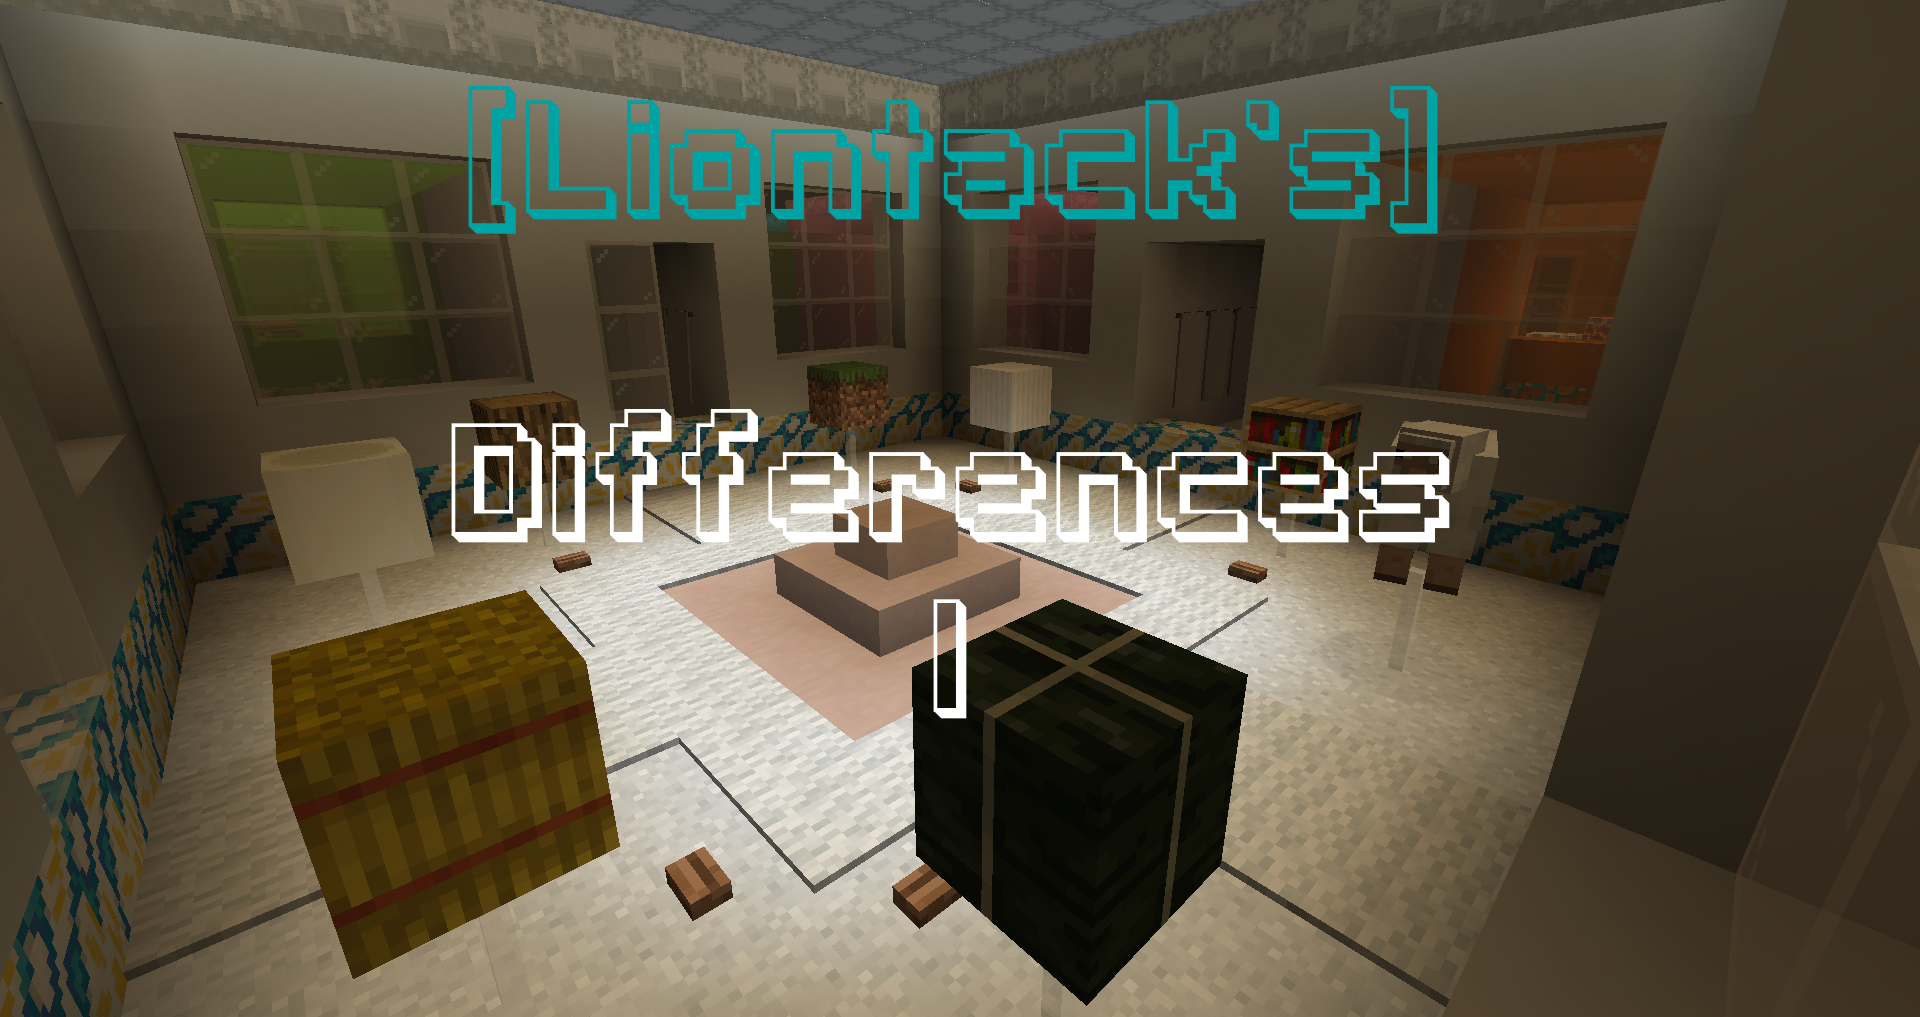 Download [Liontack's] Differences 1 for Minecraft 1.15.2